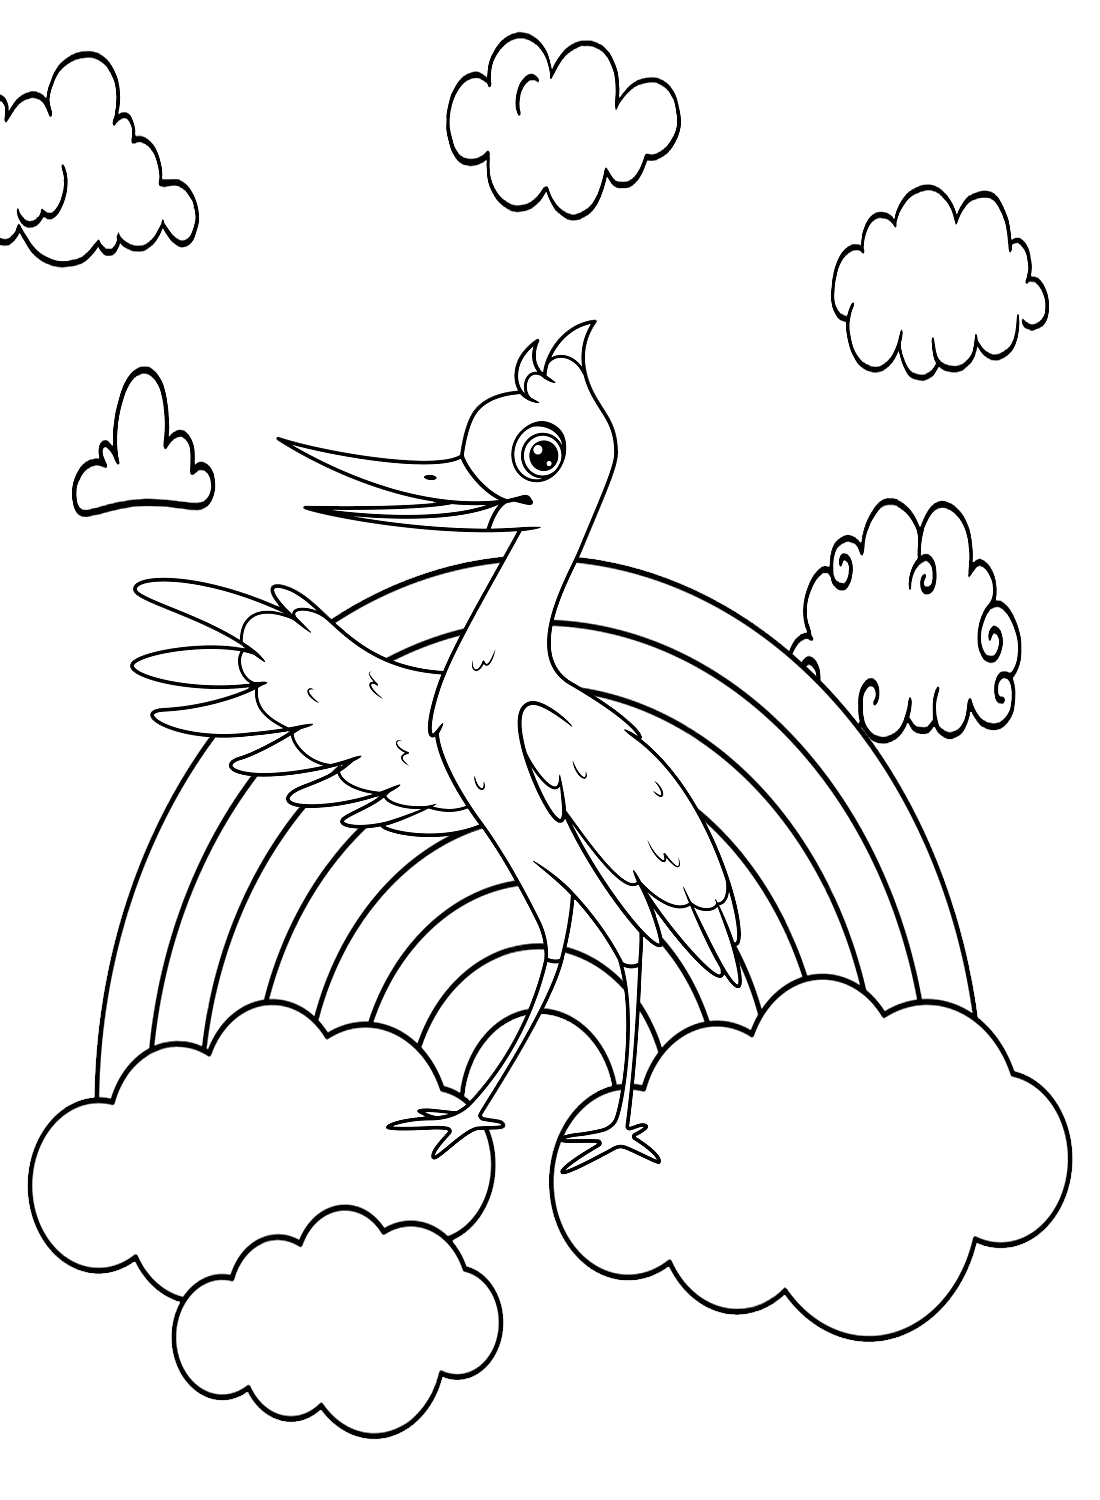 Stork with Rainbow and Clouds Coloring Page - Free Printable Coloring Pages